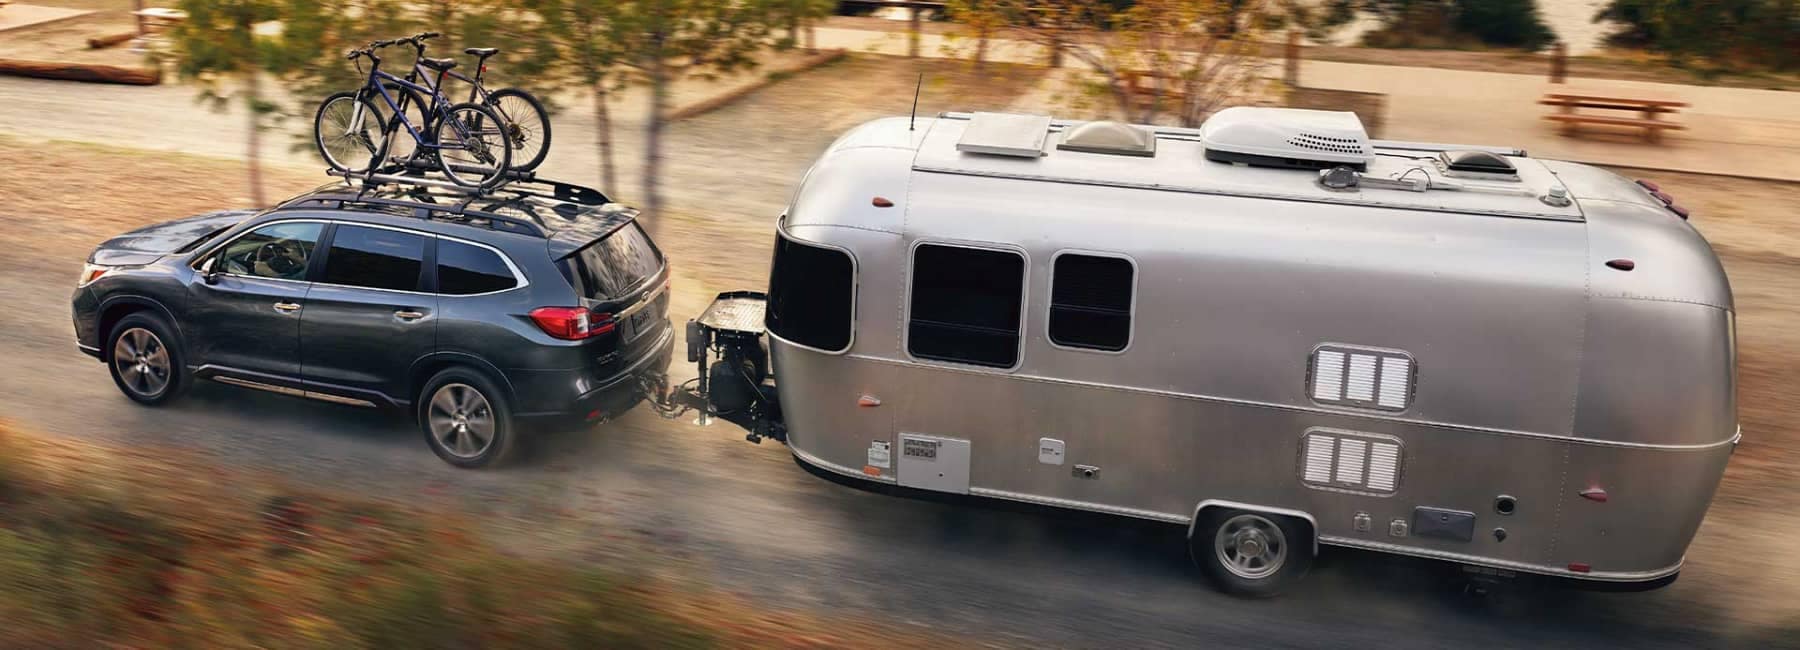 2022 Subaru Ascent-angled sideview-pulling camper w_ bikes- gray